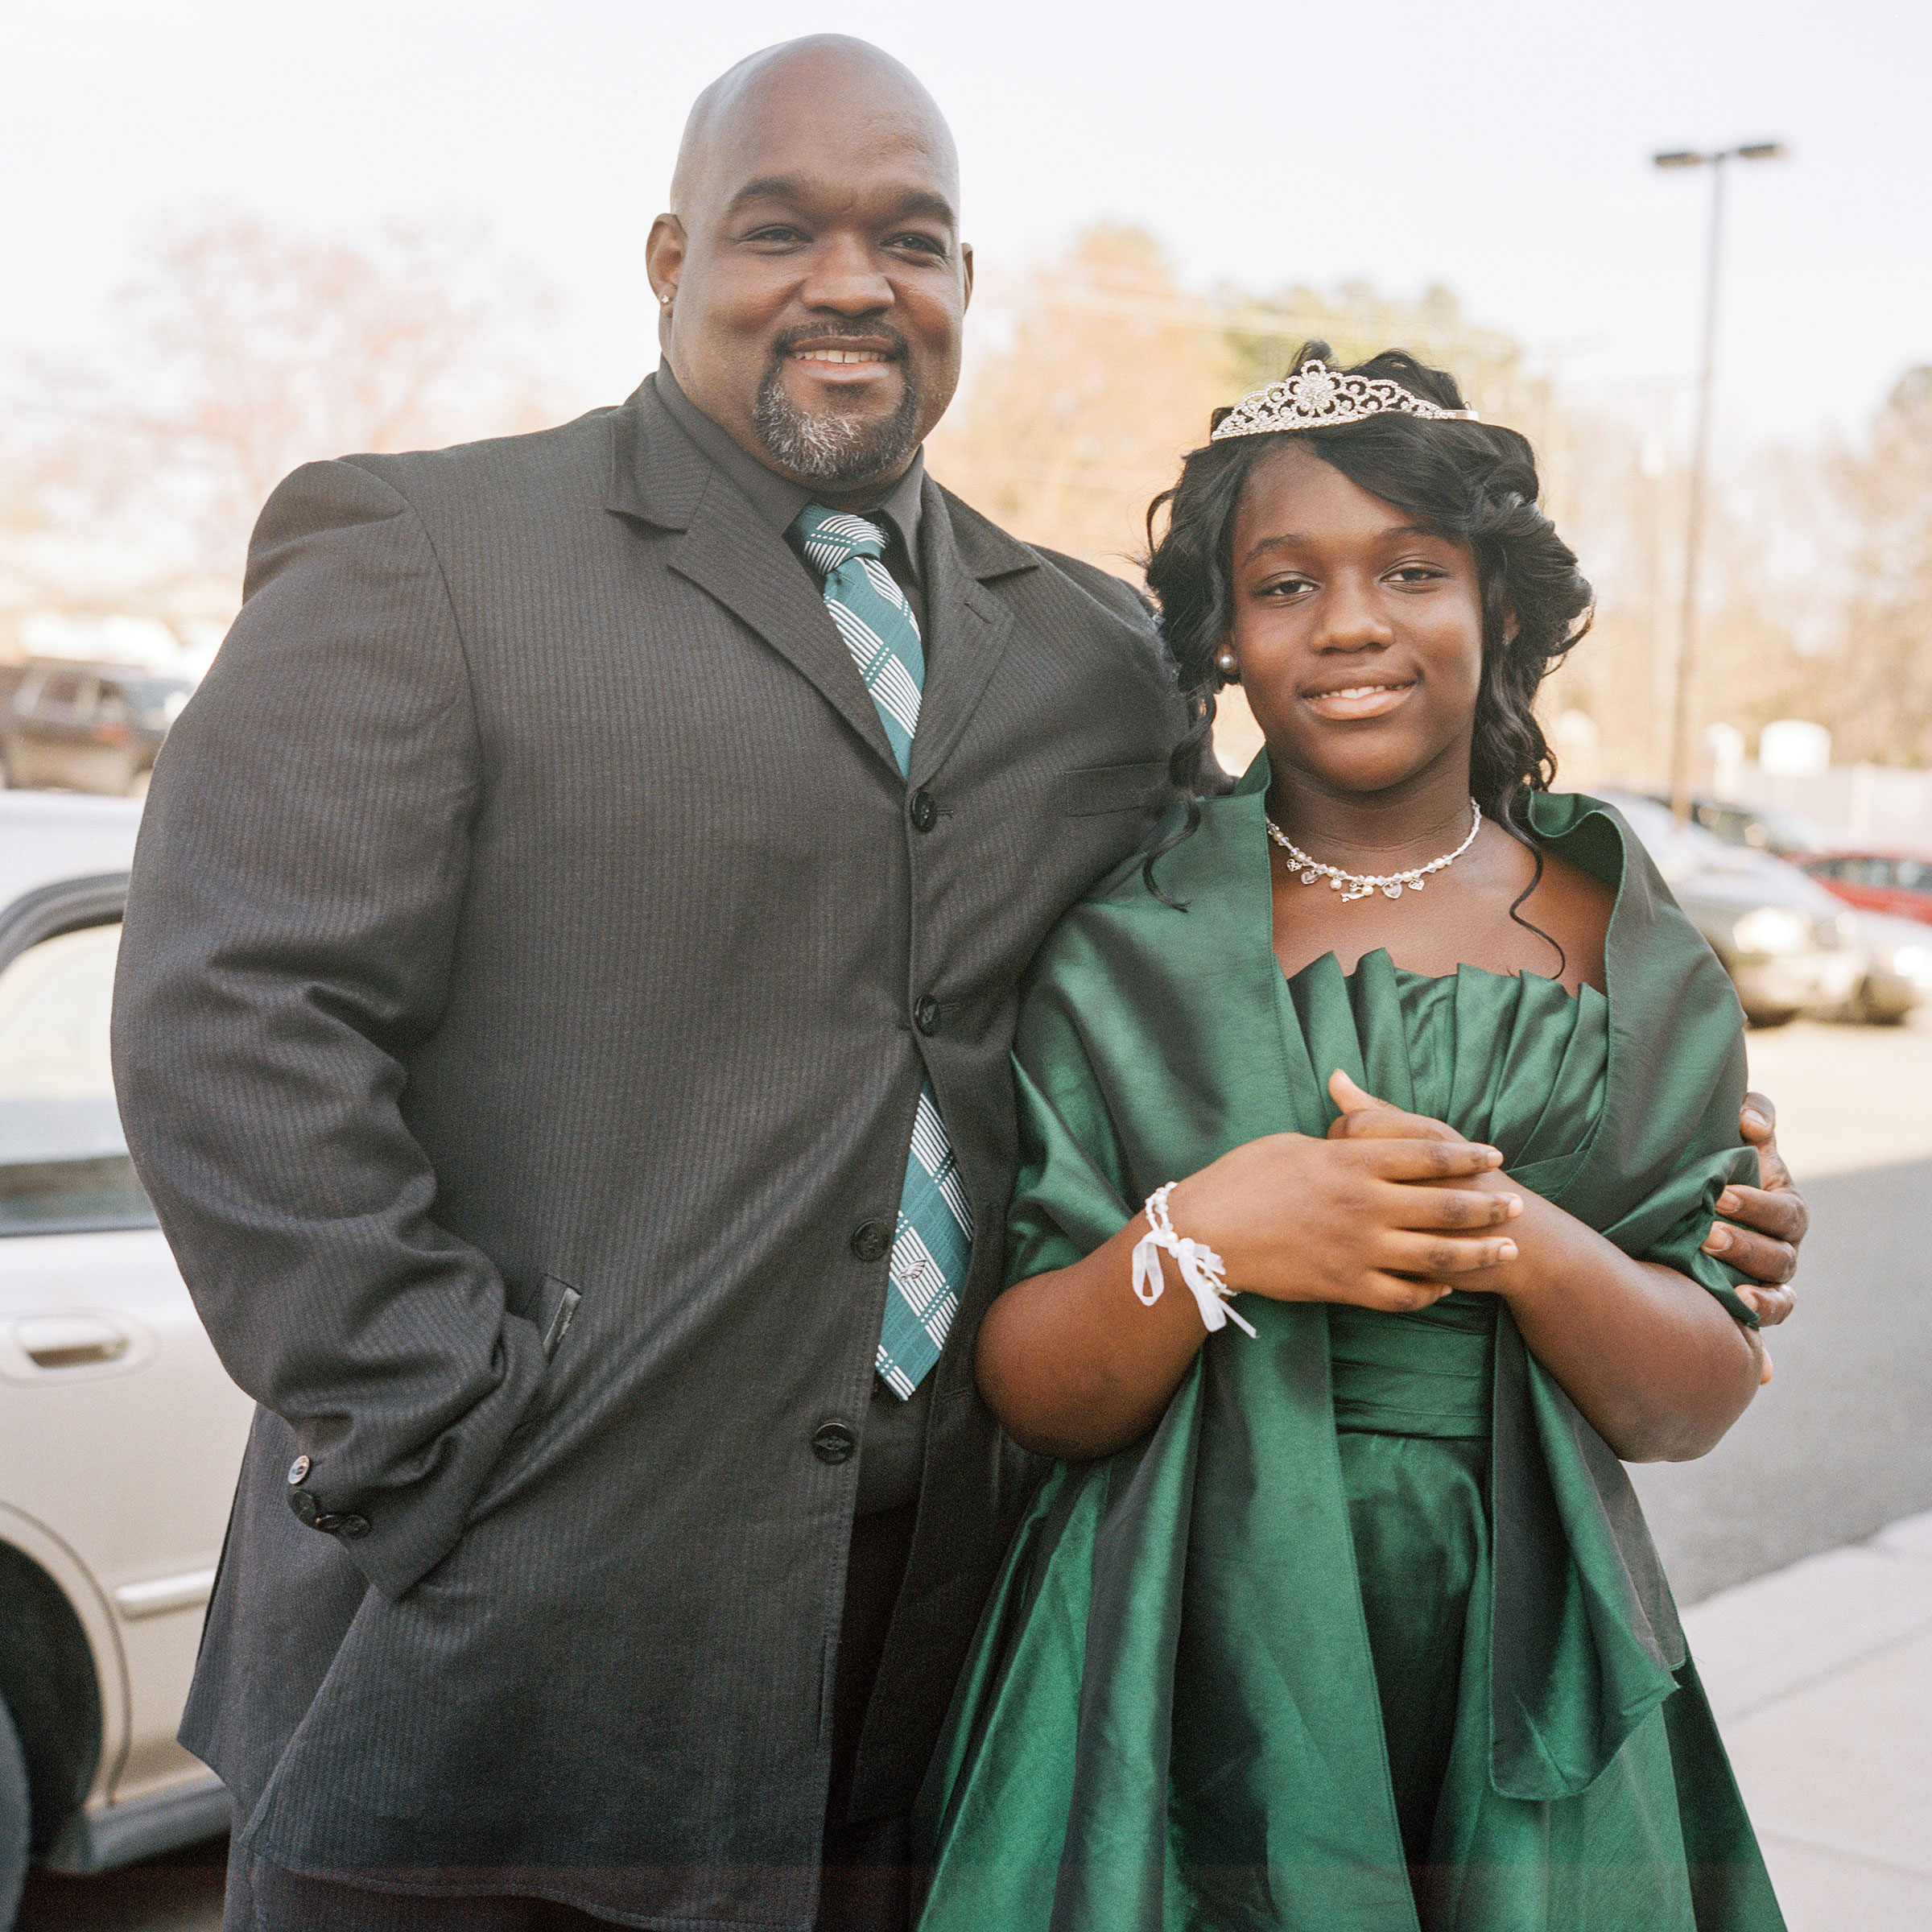 Ryan and his daughter, Rykiah, at the “Date with Dad” dance, Richmond, VA 2015